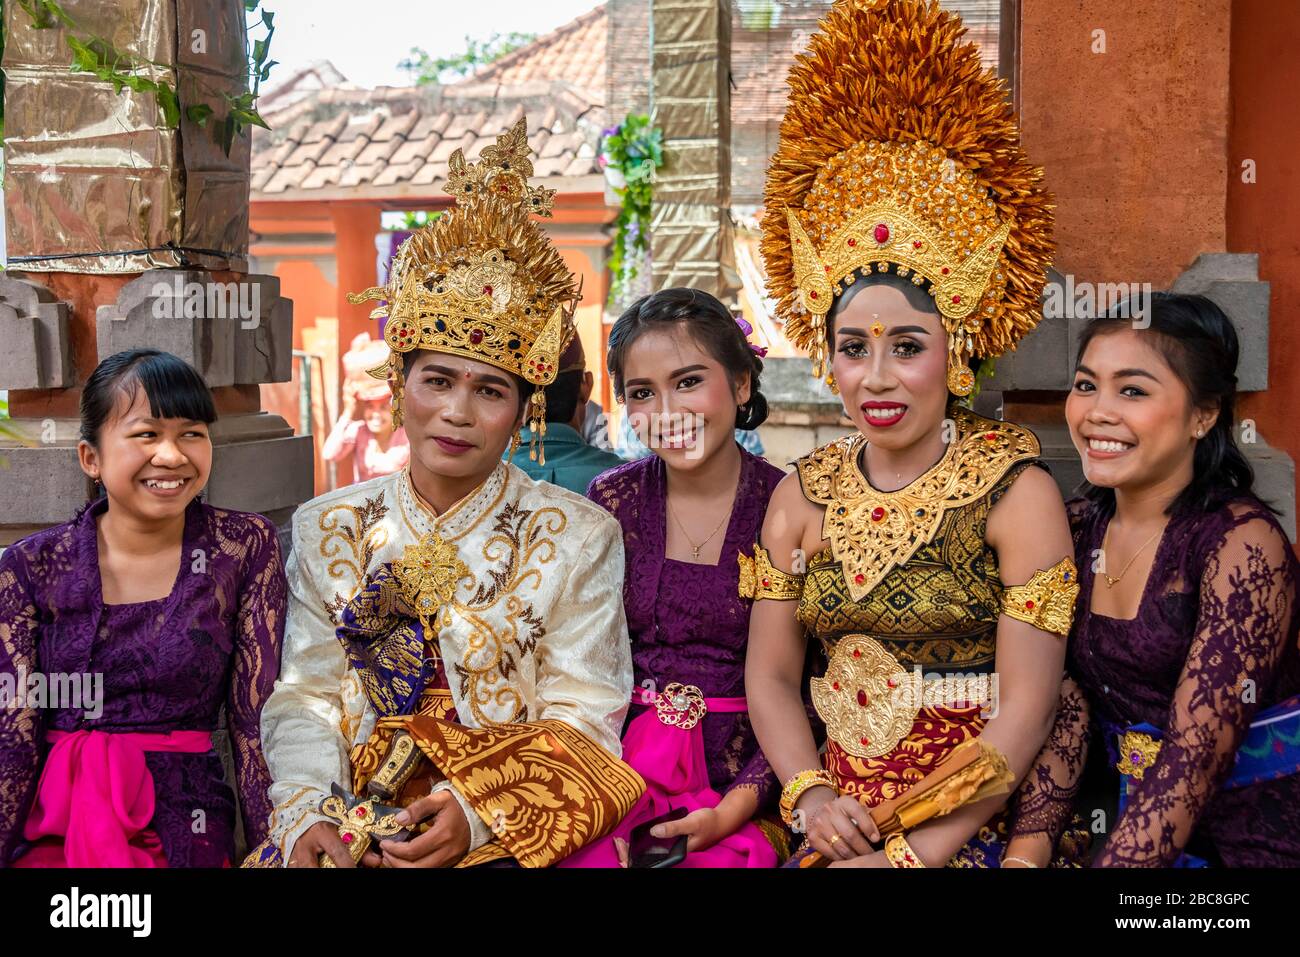 Horizontal portrait of a bride and groom with friends at a Balinese wedding, Indonesia. Stock Photo